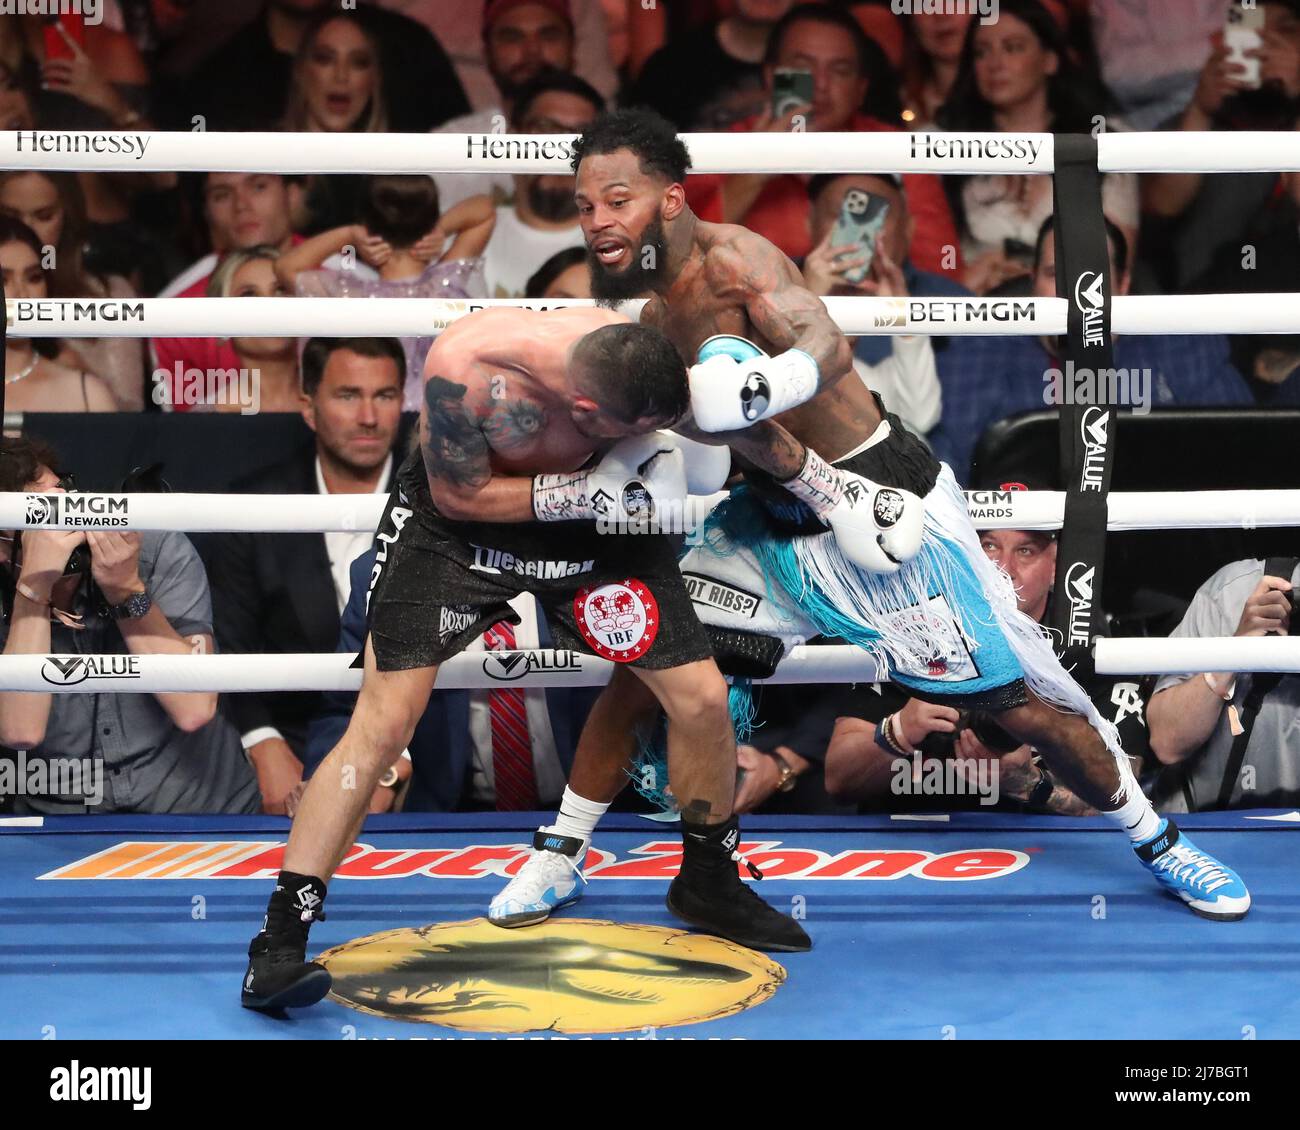 Las Vegas, United States. 07th May, 2022. LAS VEGAS, NV - MAY 7: (R-L)  Boxer Montana Love punches Gabriel Valenzuela during their fight at the  T-Mobile Arena on May 7, 2022 in